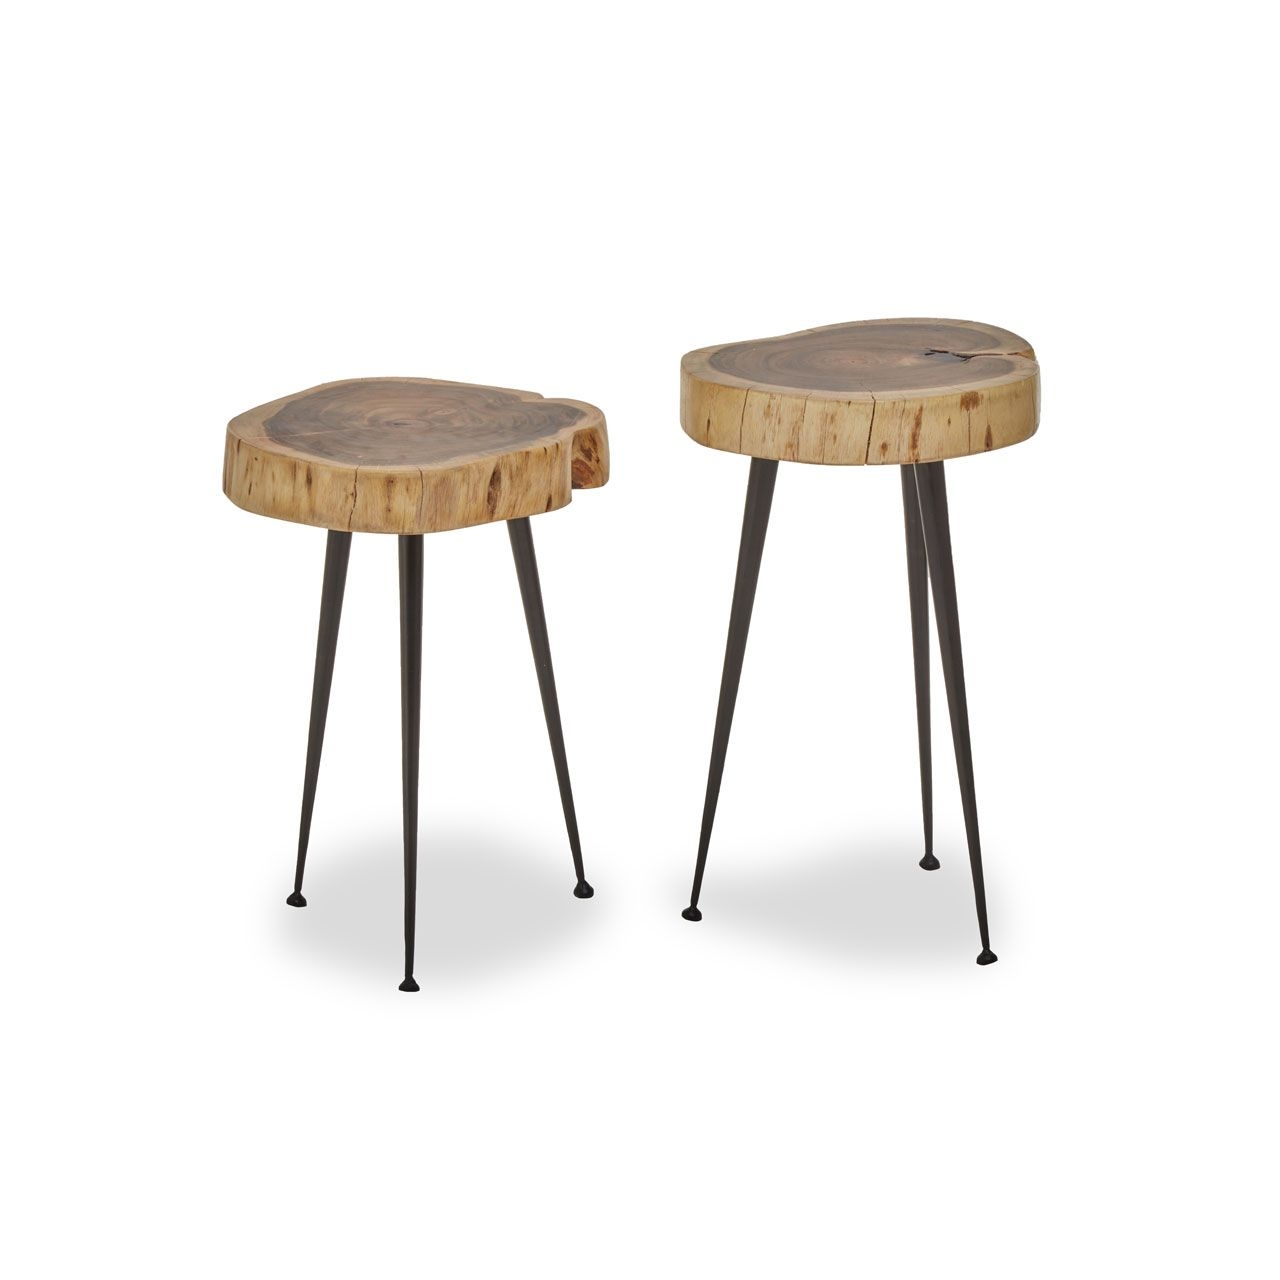 Nandri Wooden Set Of 2 Side Tables In Natural With Black Metal Legs